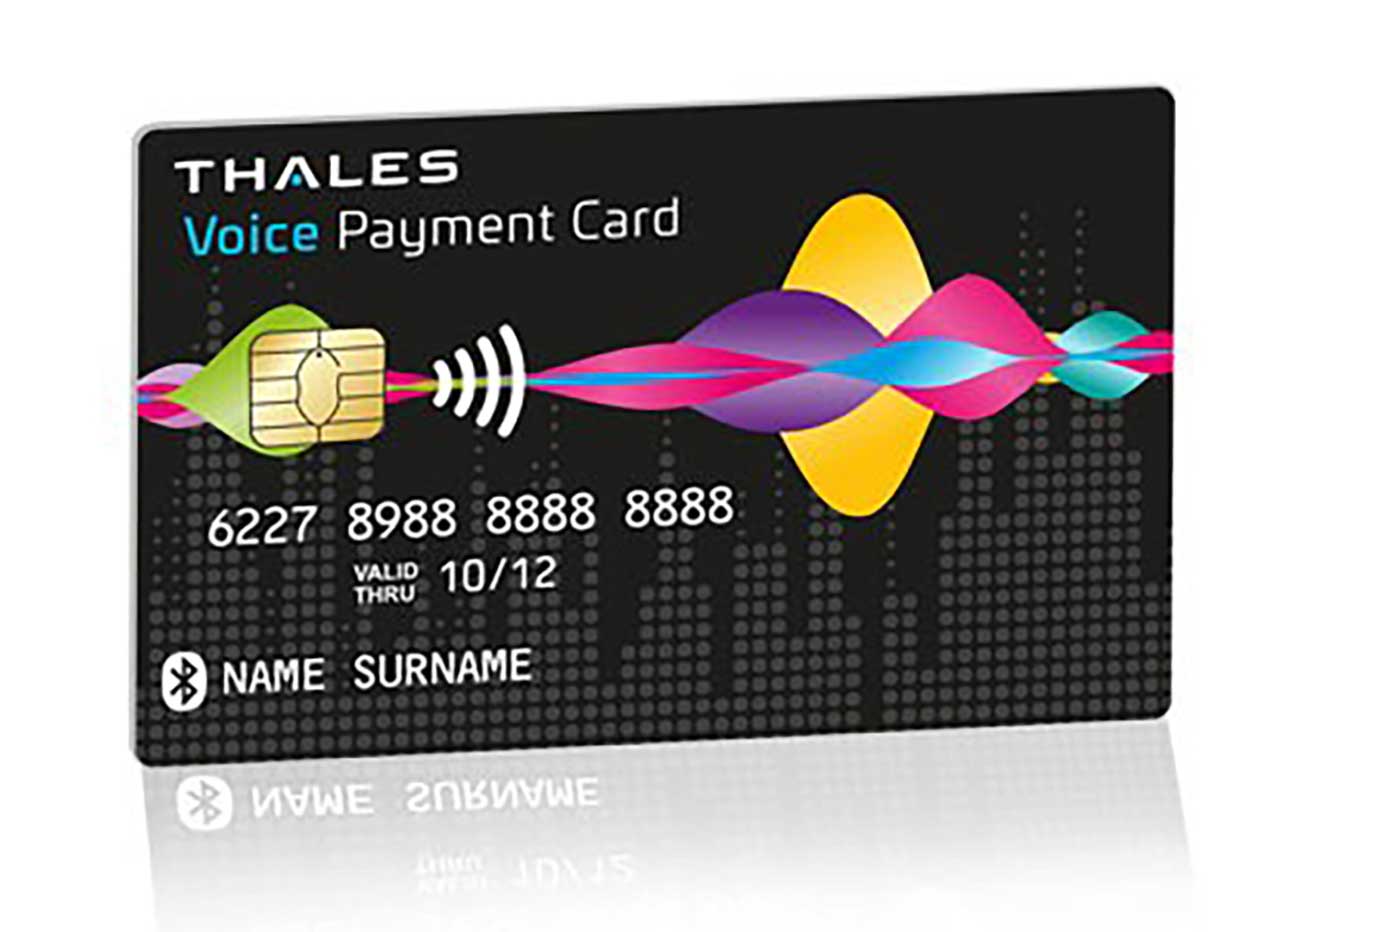 Voice Payment Card